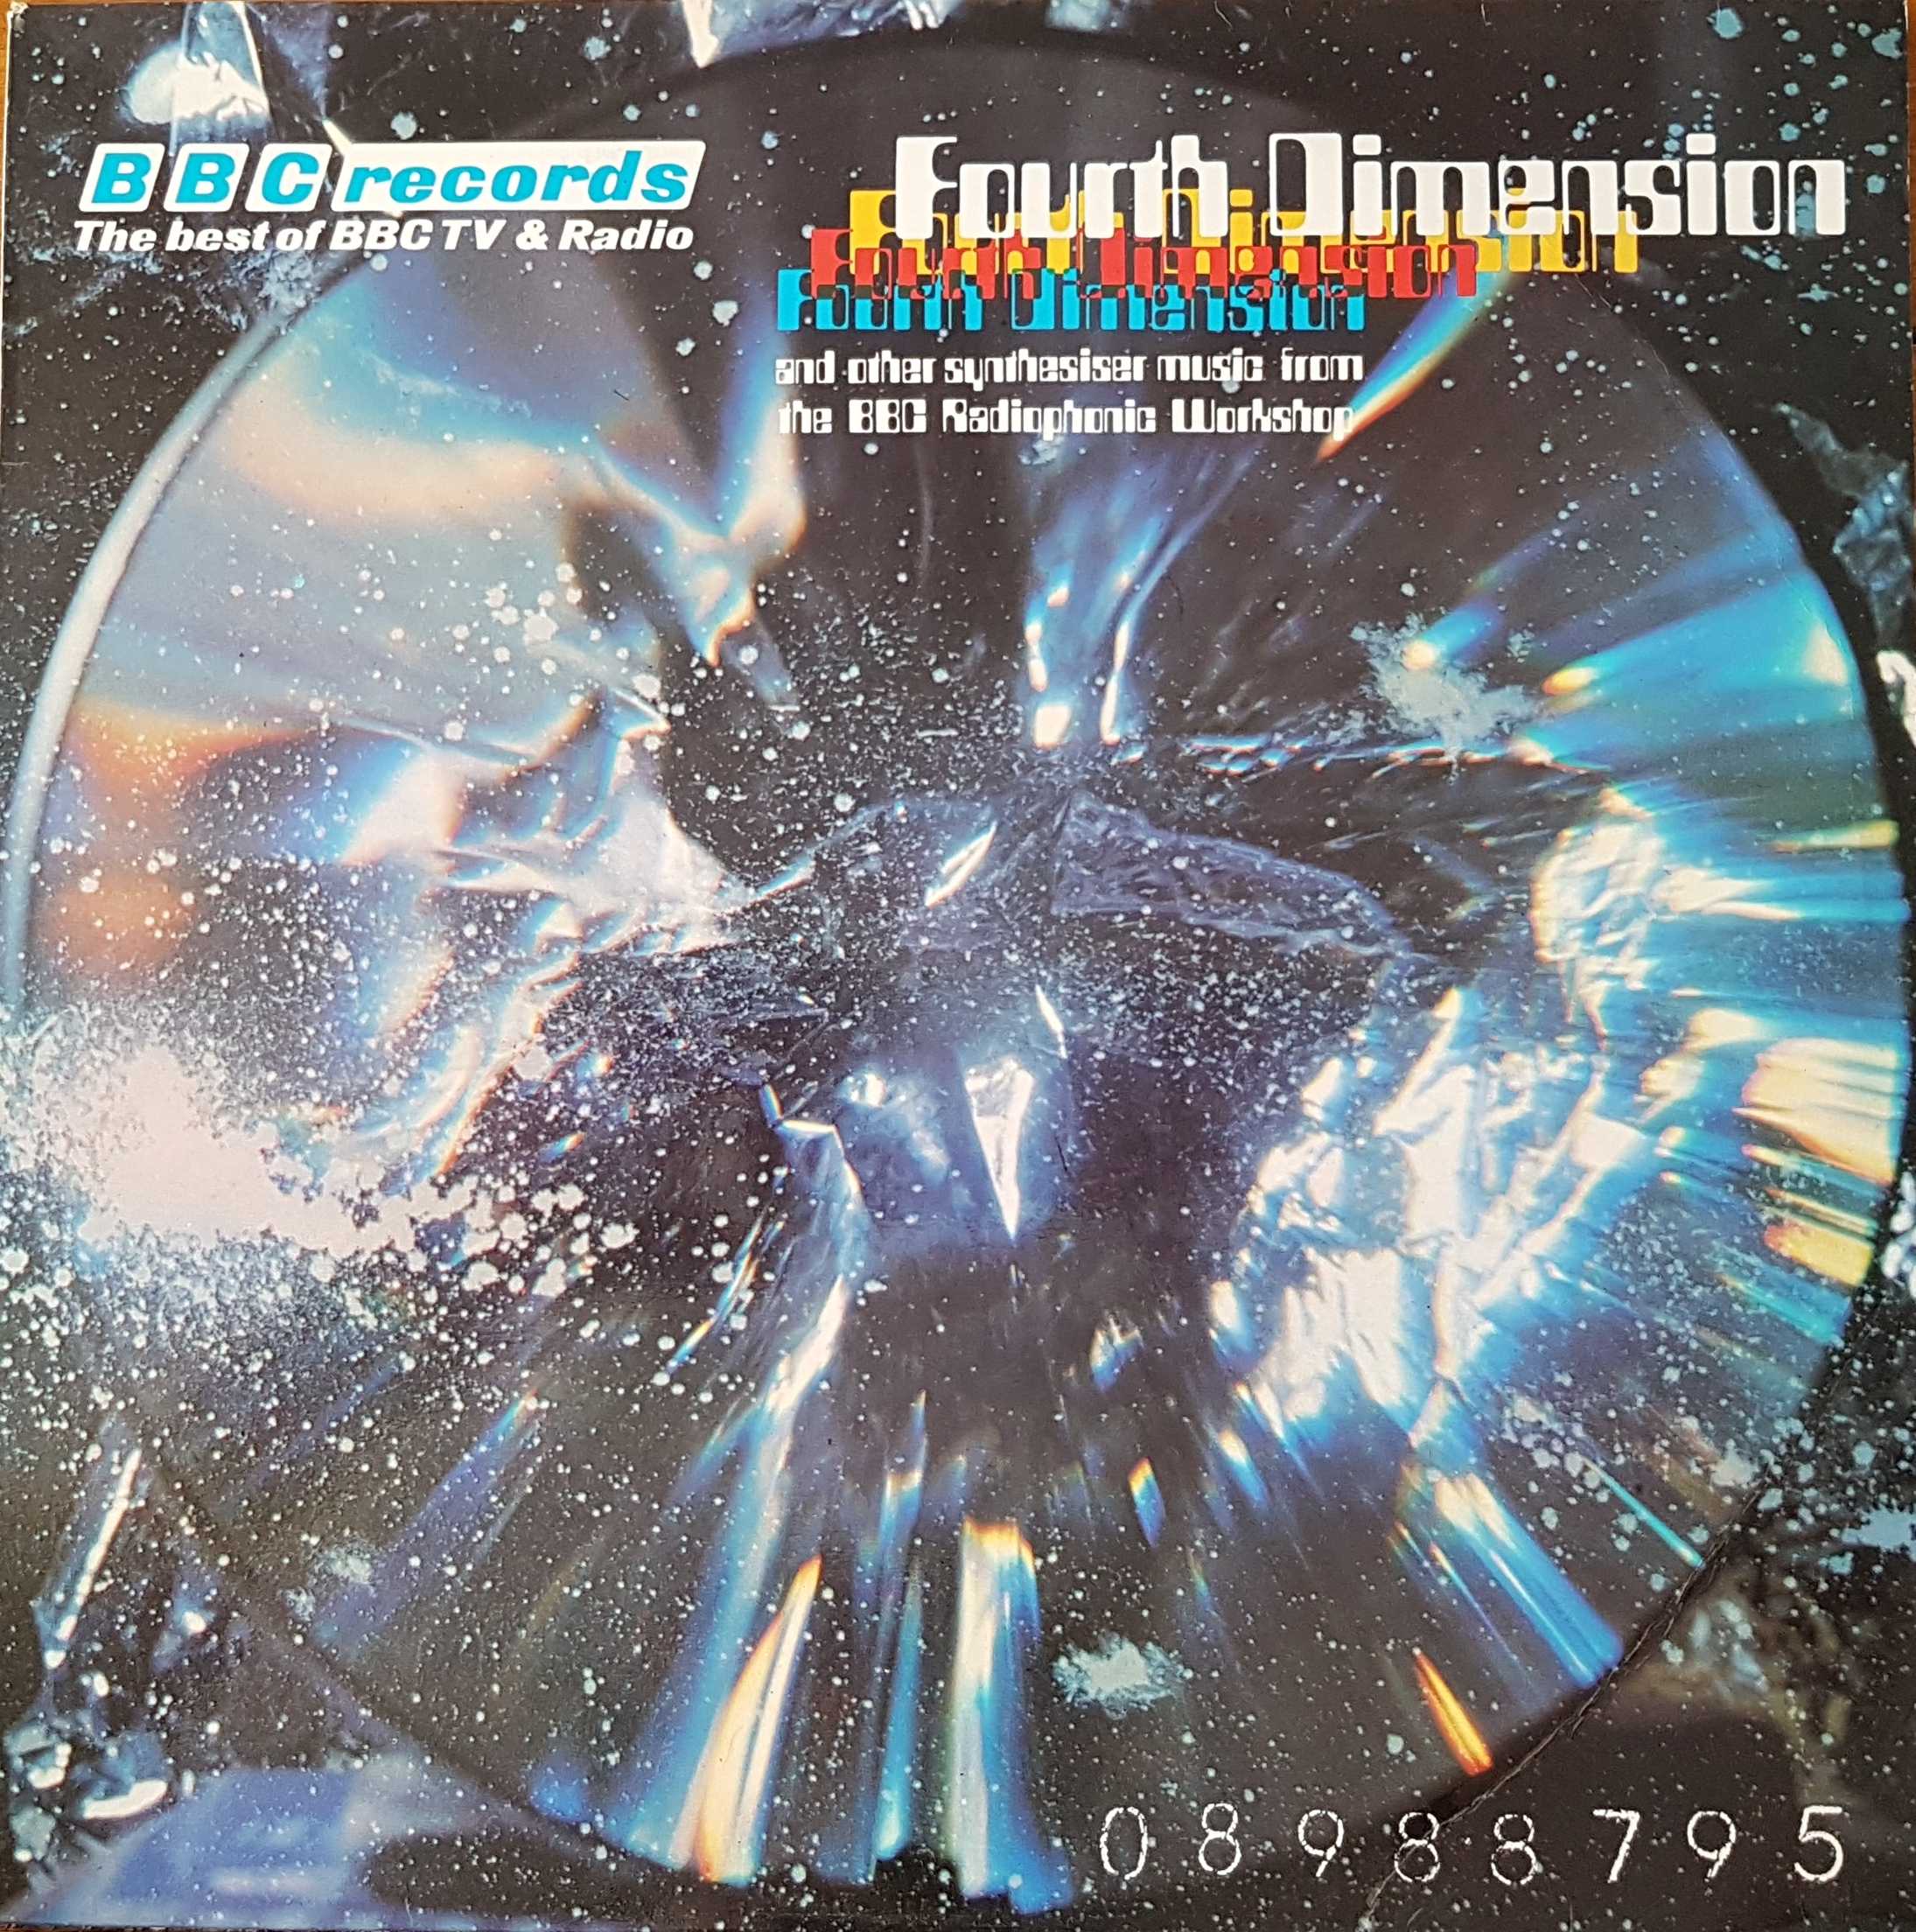 Picture of RED 93 Fourth dimension by artist BBC radiophonic workshop from the BBC albums - Records and Tapes library